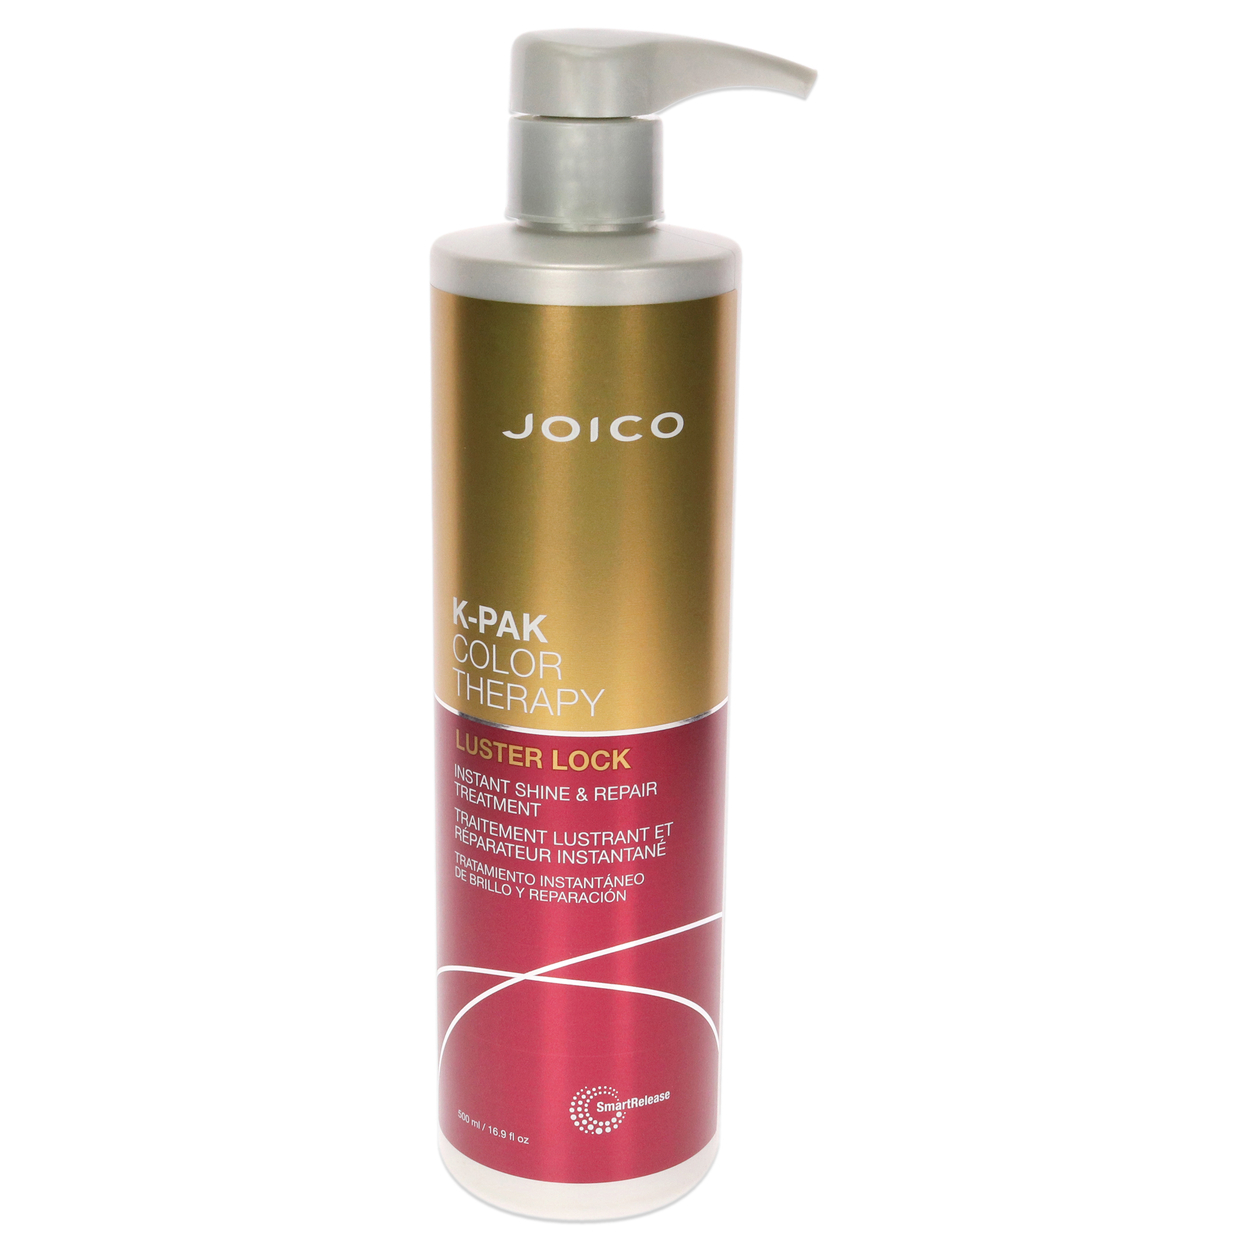 Joico Unisex HAIRCARE K-Pak Color Therapy Luster Lock 16.9 Oz